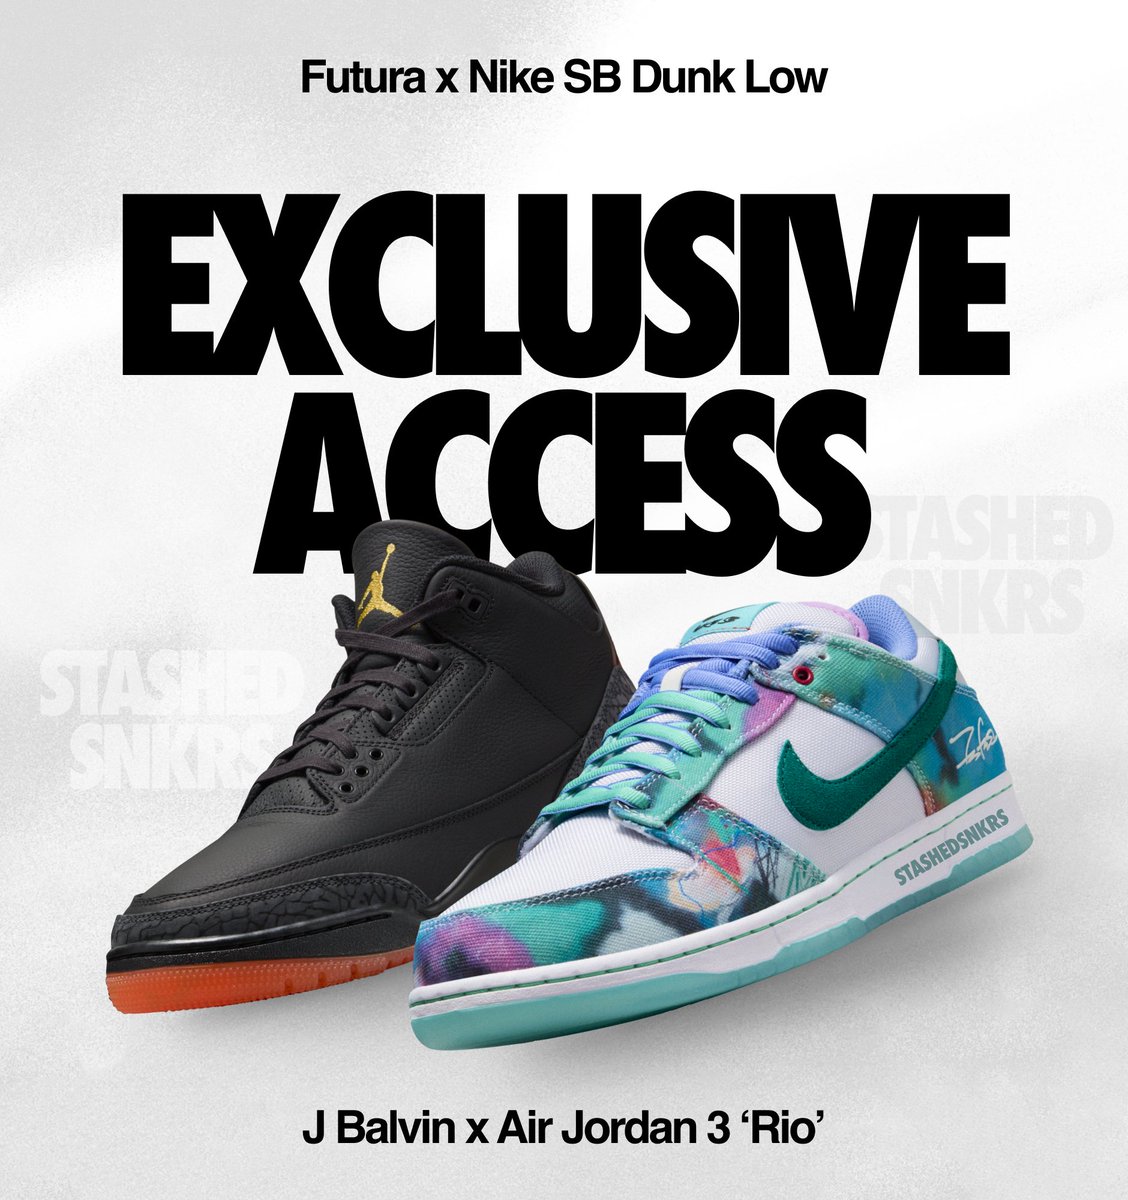 Exclusive access is coming tomorrow on SNKRS EU/UK for the Nike SB Dunk Low x Futura and Jordan 3 x J Balvin ‼️

➡️We’ll send you a notification in the Stashed Discord as soon as access goes out, since Nike usually doesn't. Join here - stashed-sneakers.com